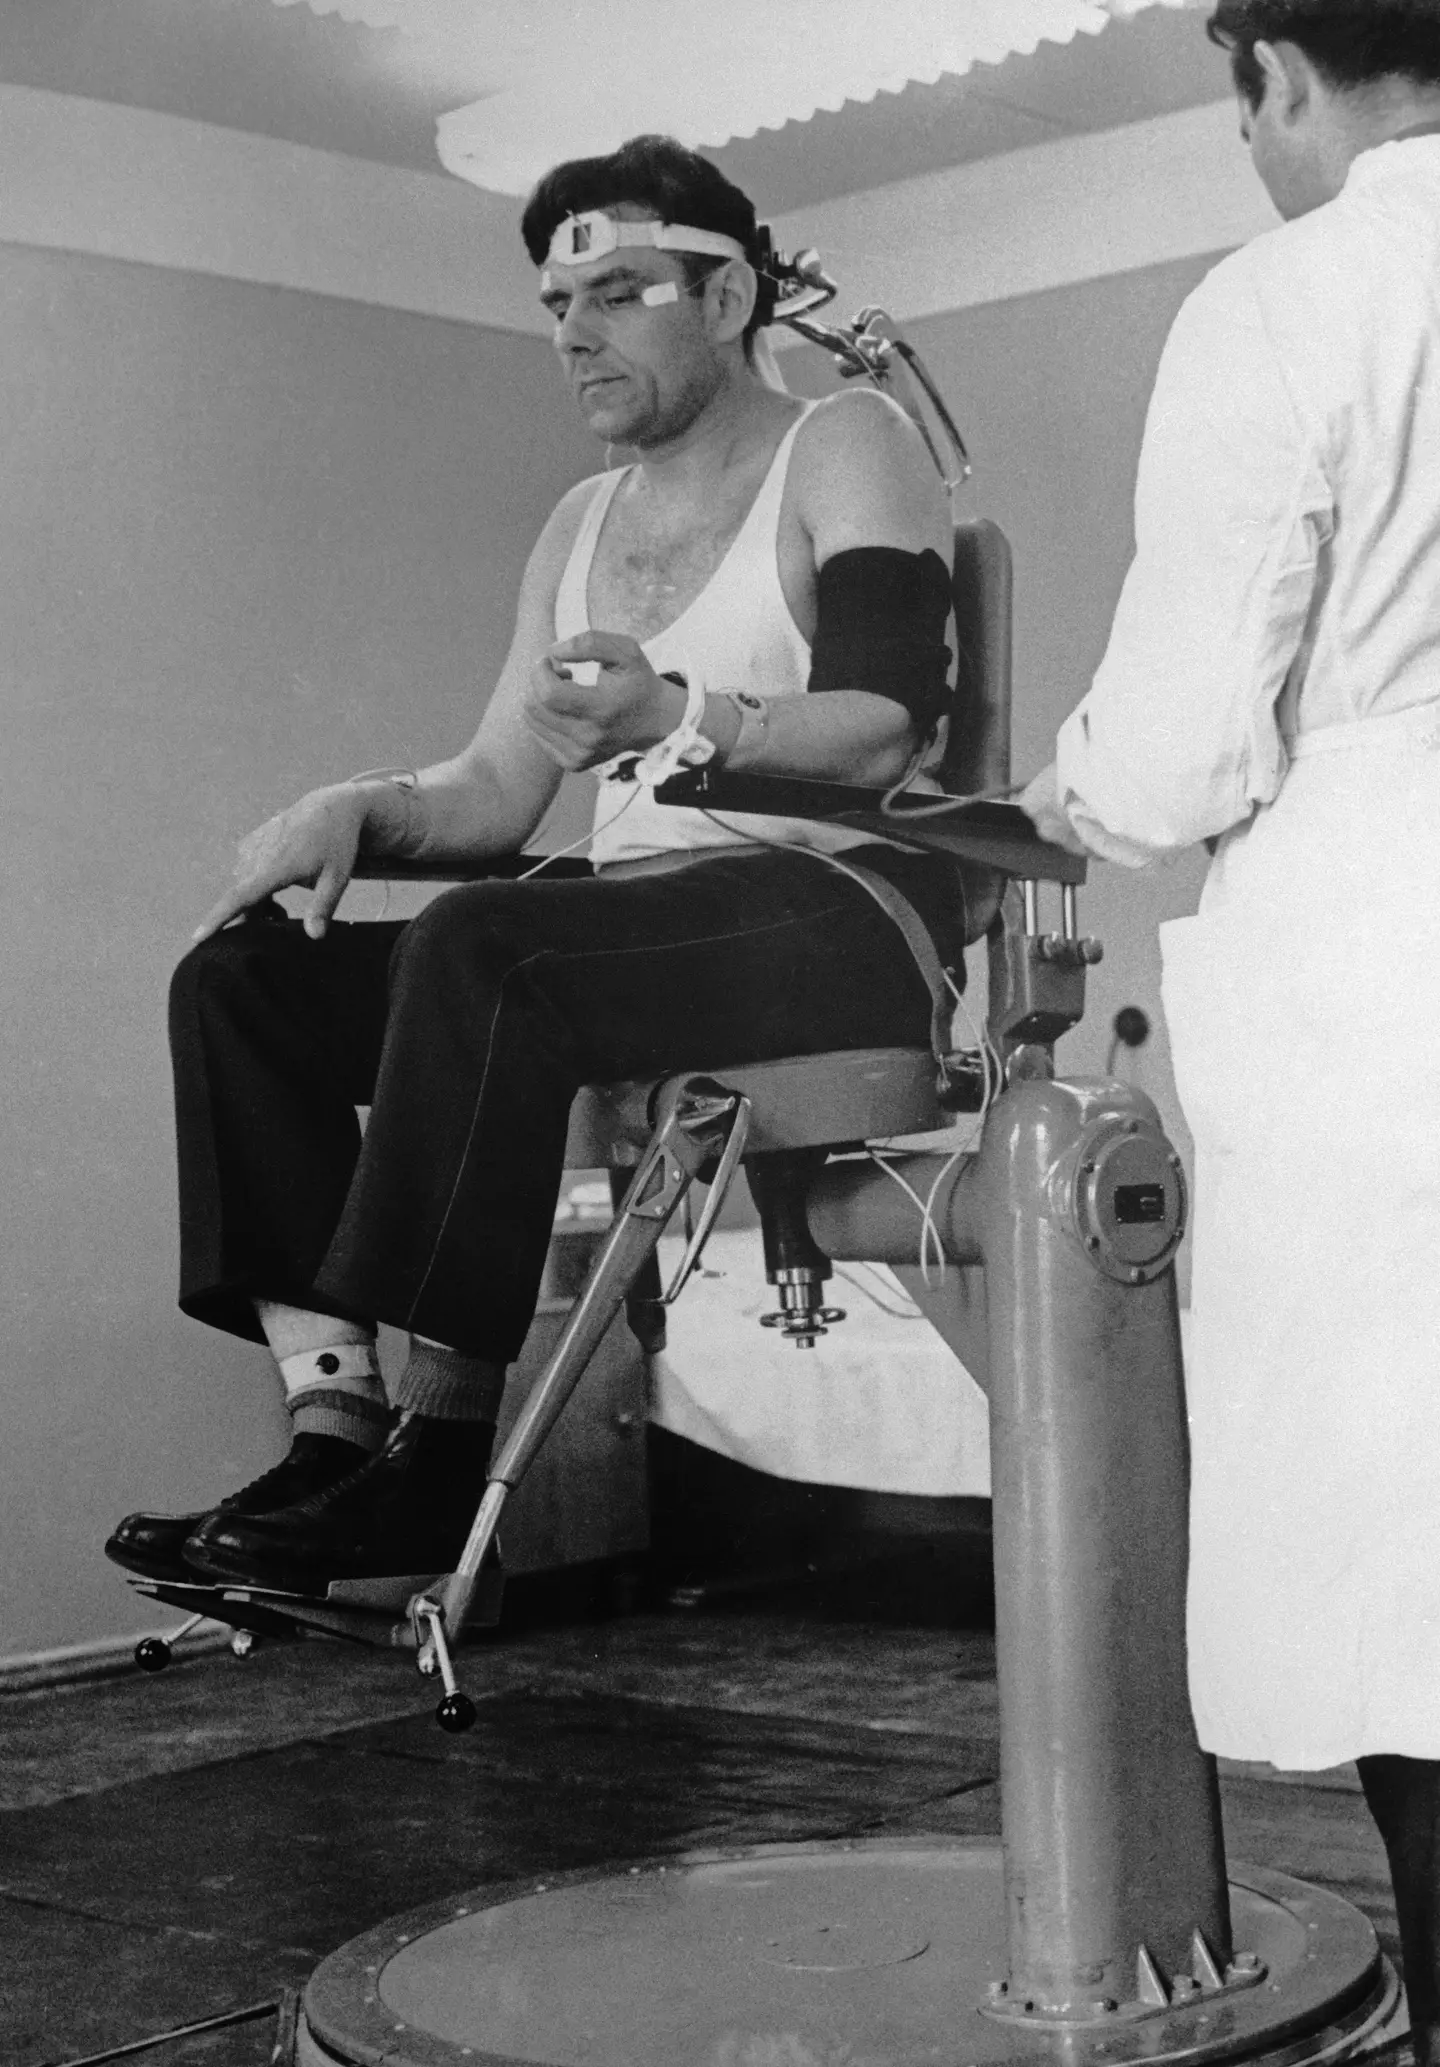 Vladimir Komarov undergoing medical test some time prior to his April 22nd trip into space.